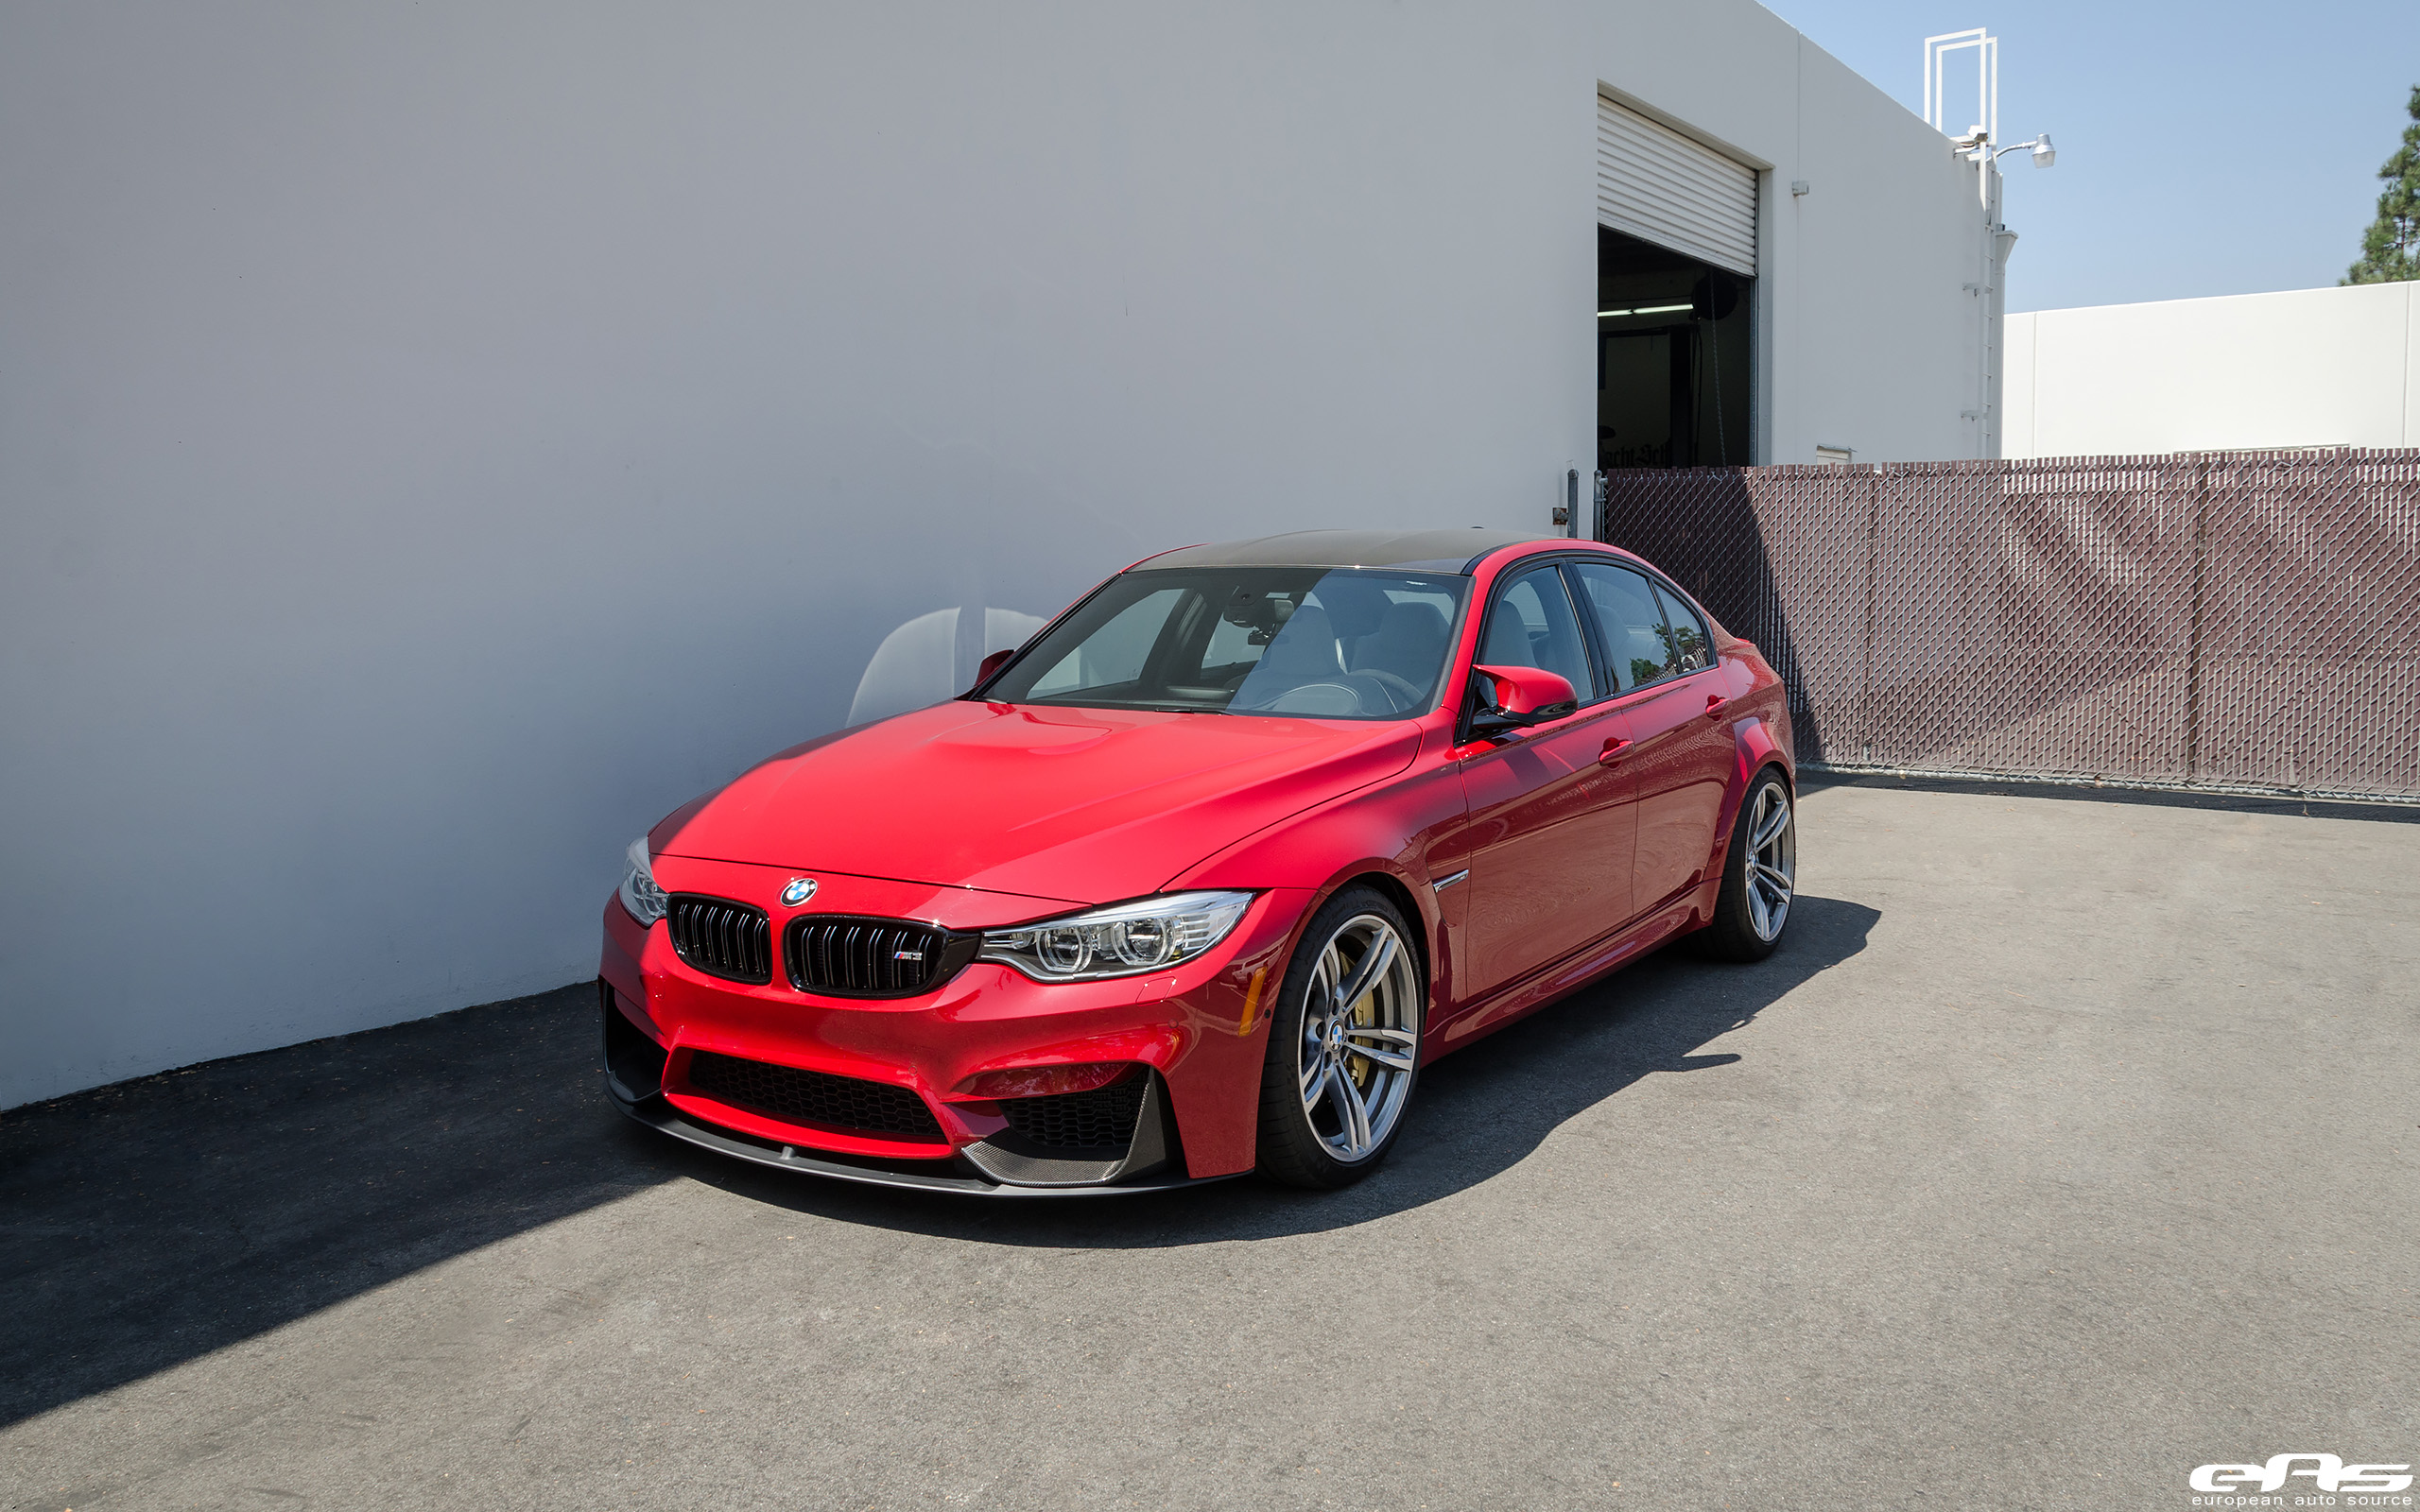 F80 BMW M3 by Auto European Source Wears Modded Imola Red Finish